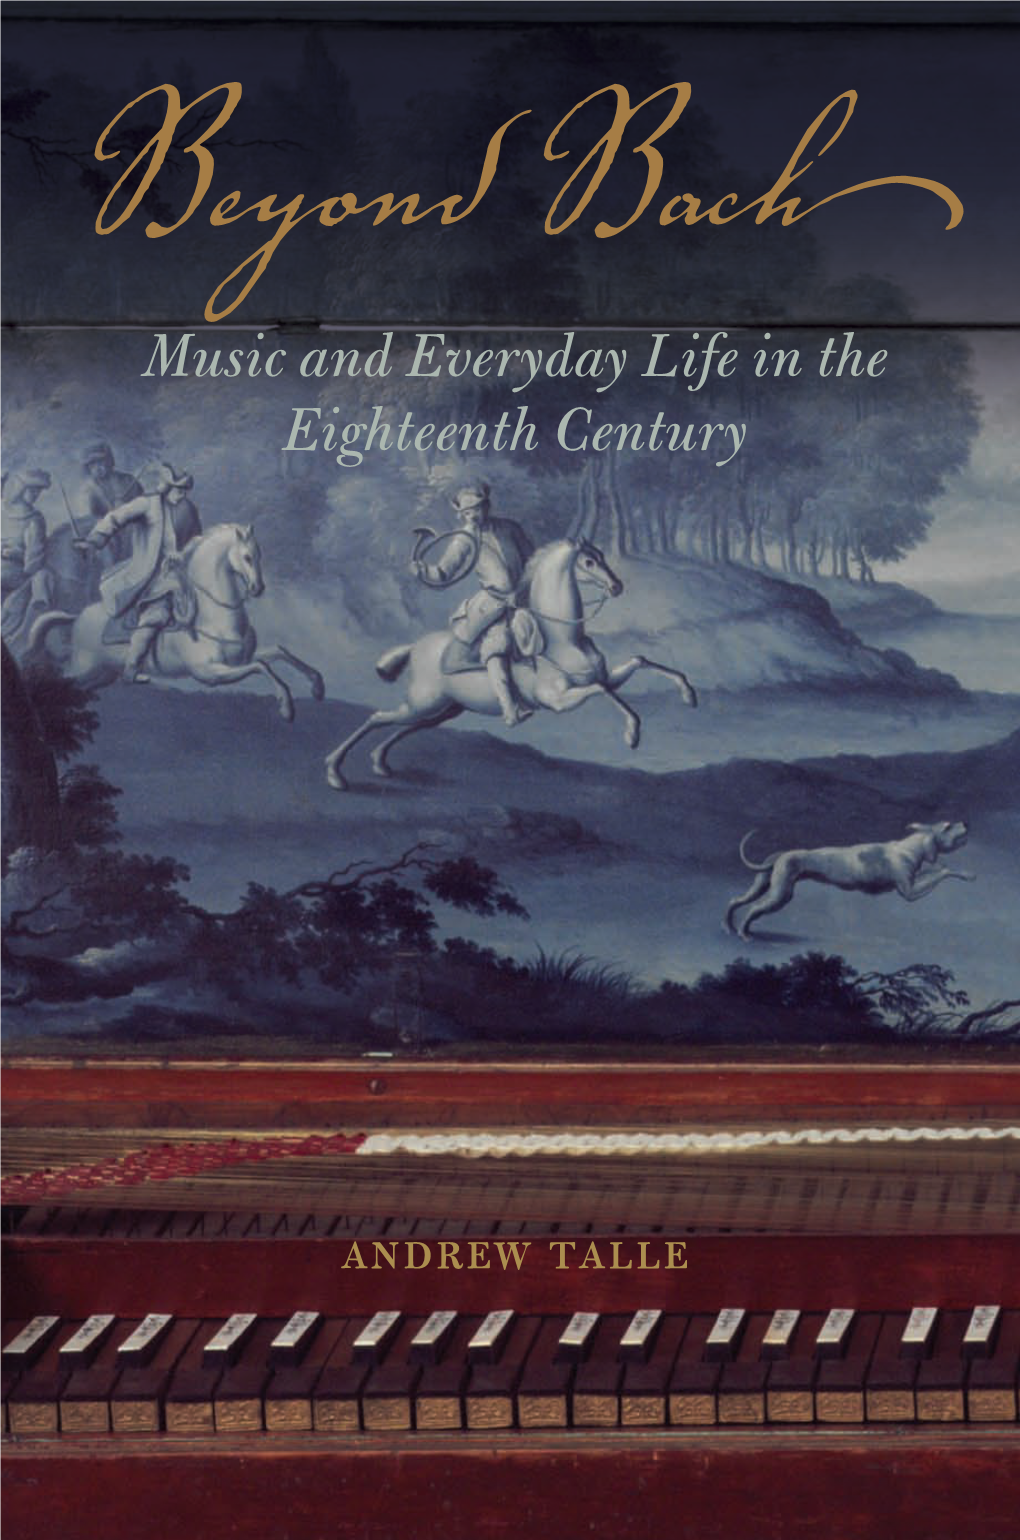 Beyond Bach• Music and Everyday Life in the Eighteenth Century